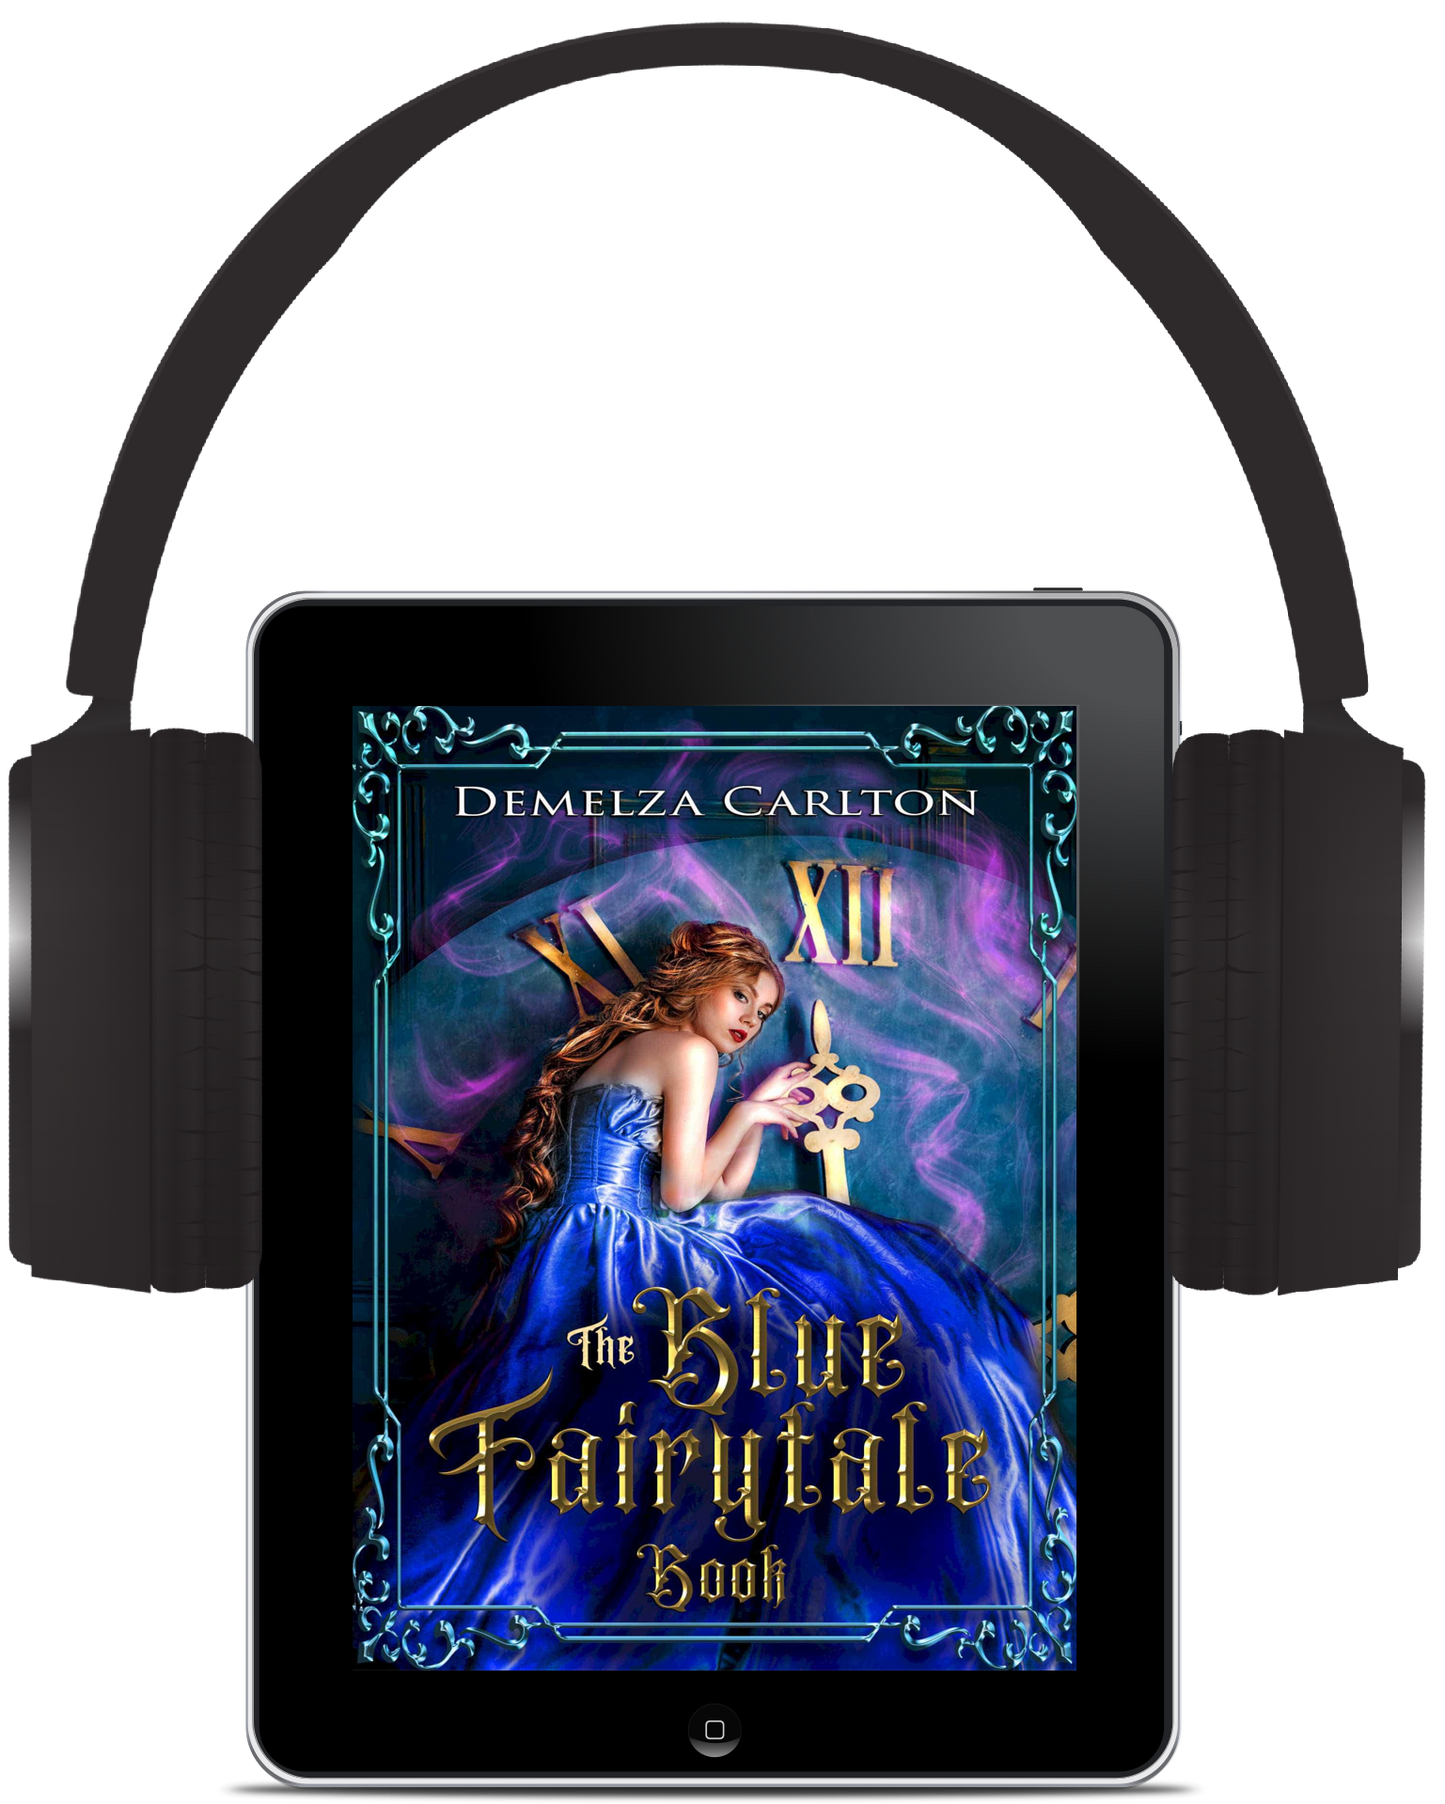 The Blue Fairytale Book (Book 4-8 in the Romance a Medieval Fairytale series) AUDIOBOOK